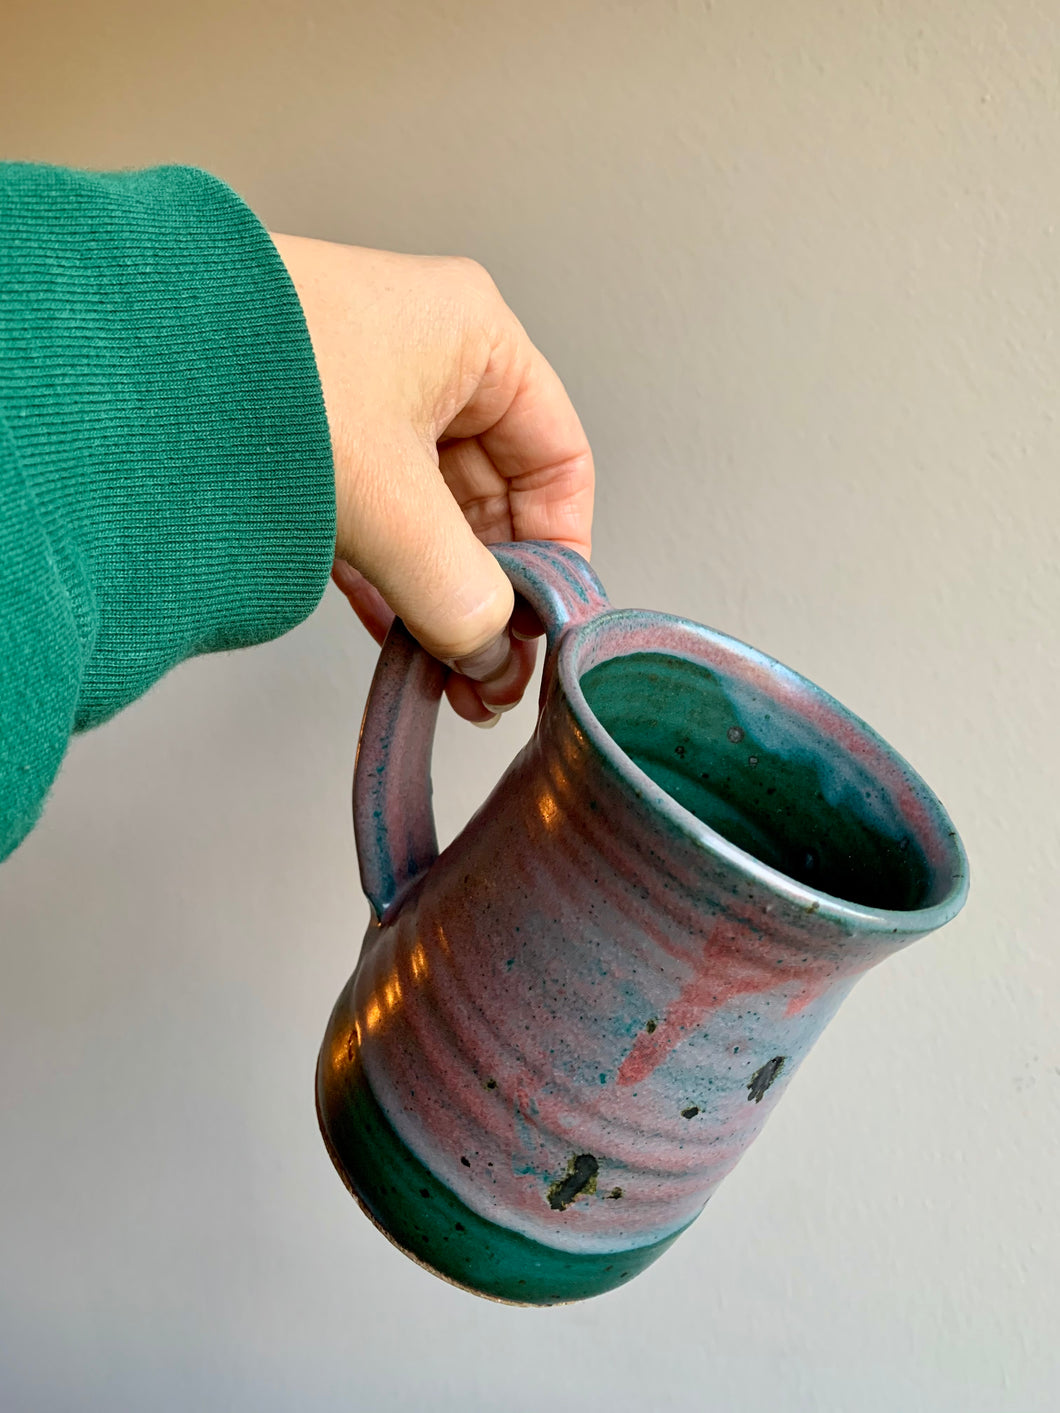 Woman holds a dark green and pink glazed pottery mug.